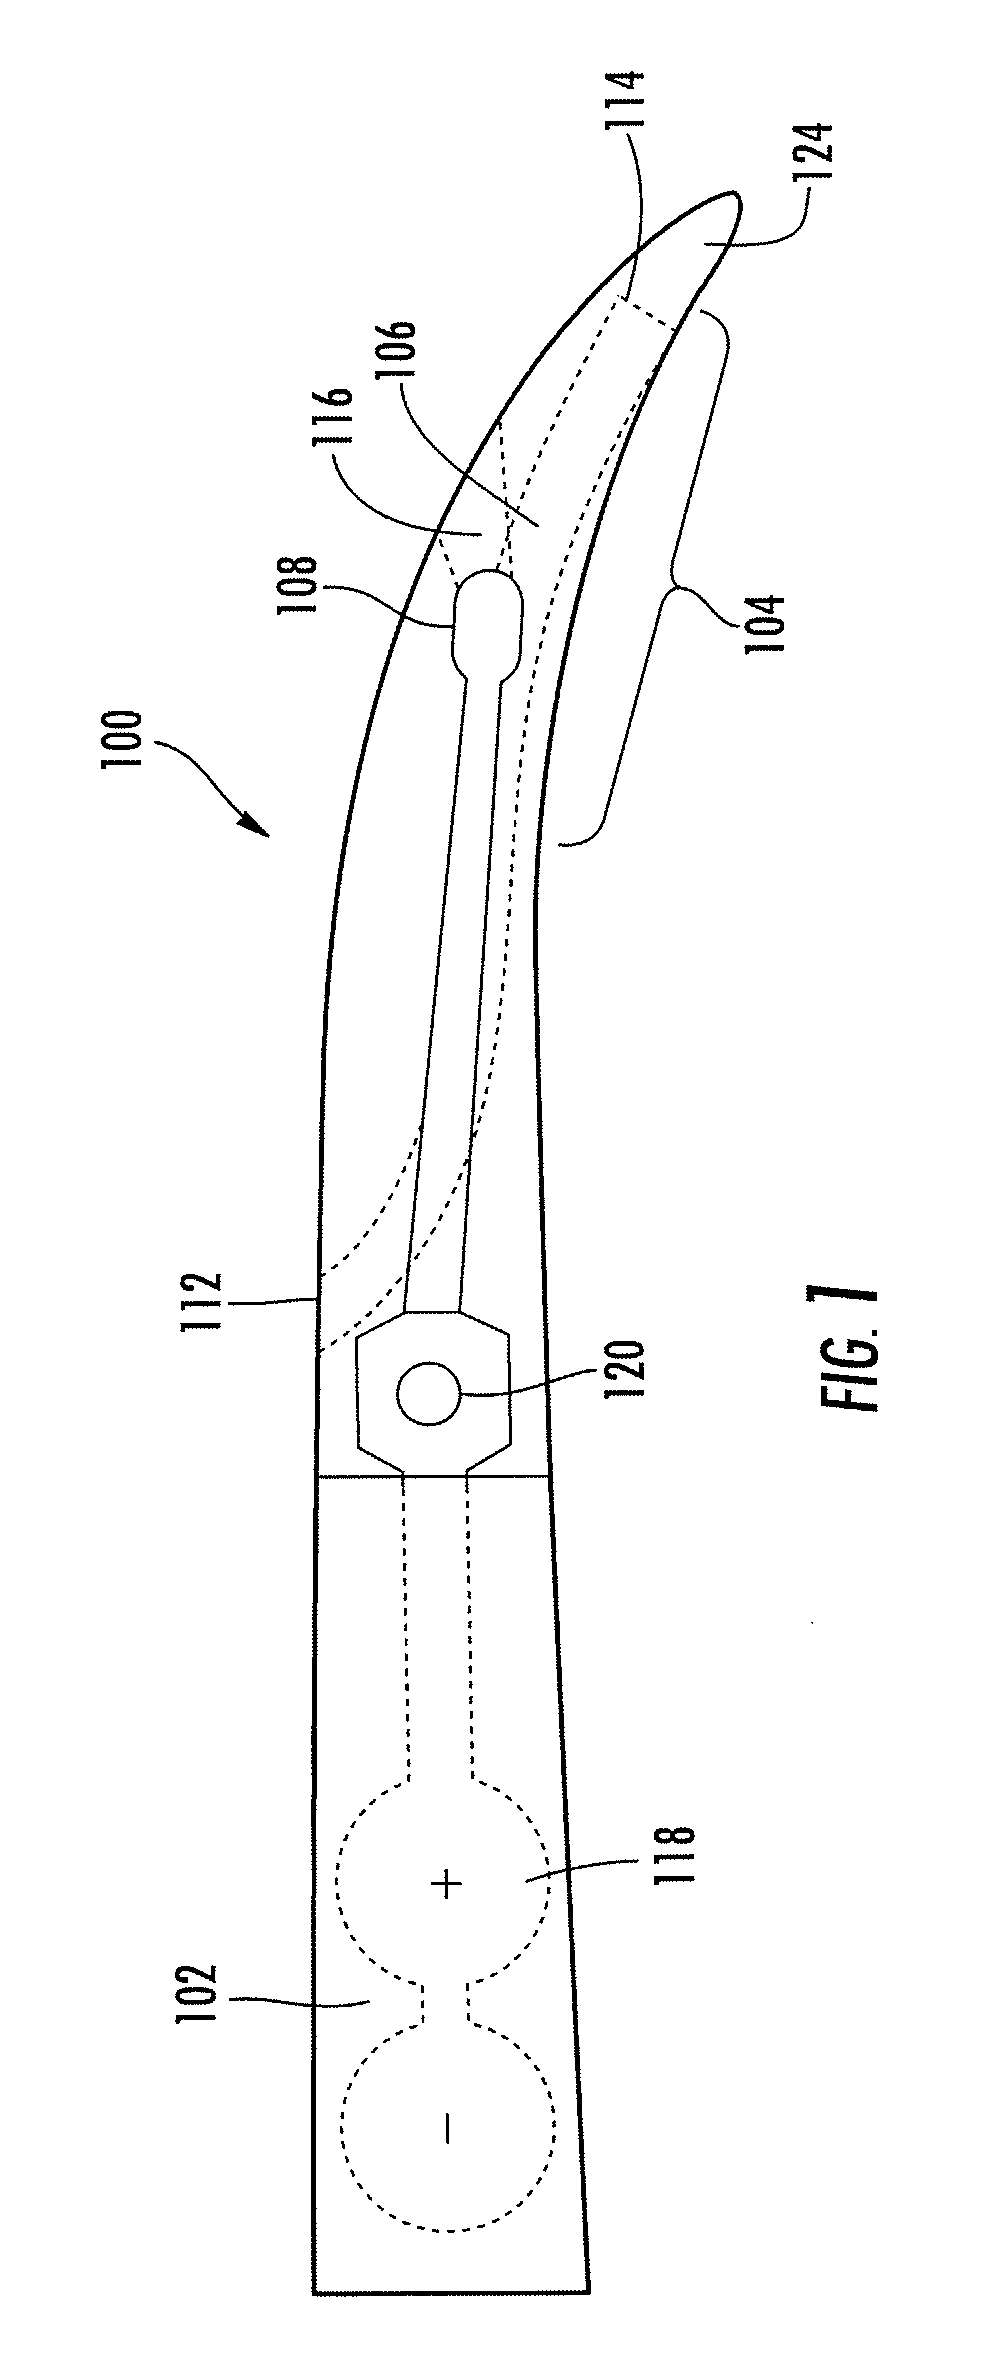 Insertion aid for oral and nasal medical devices